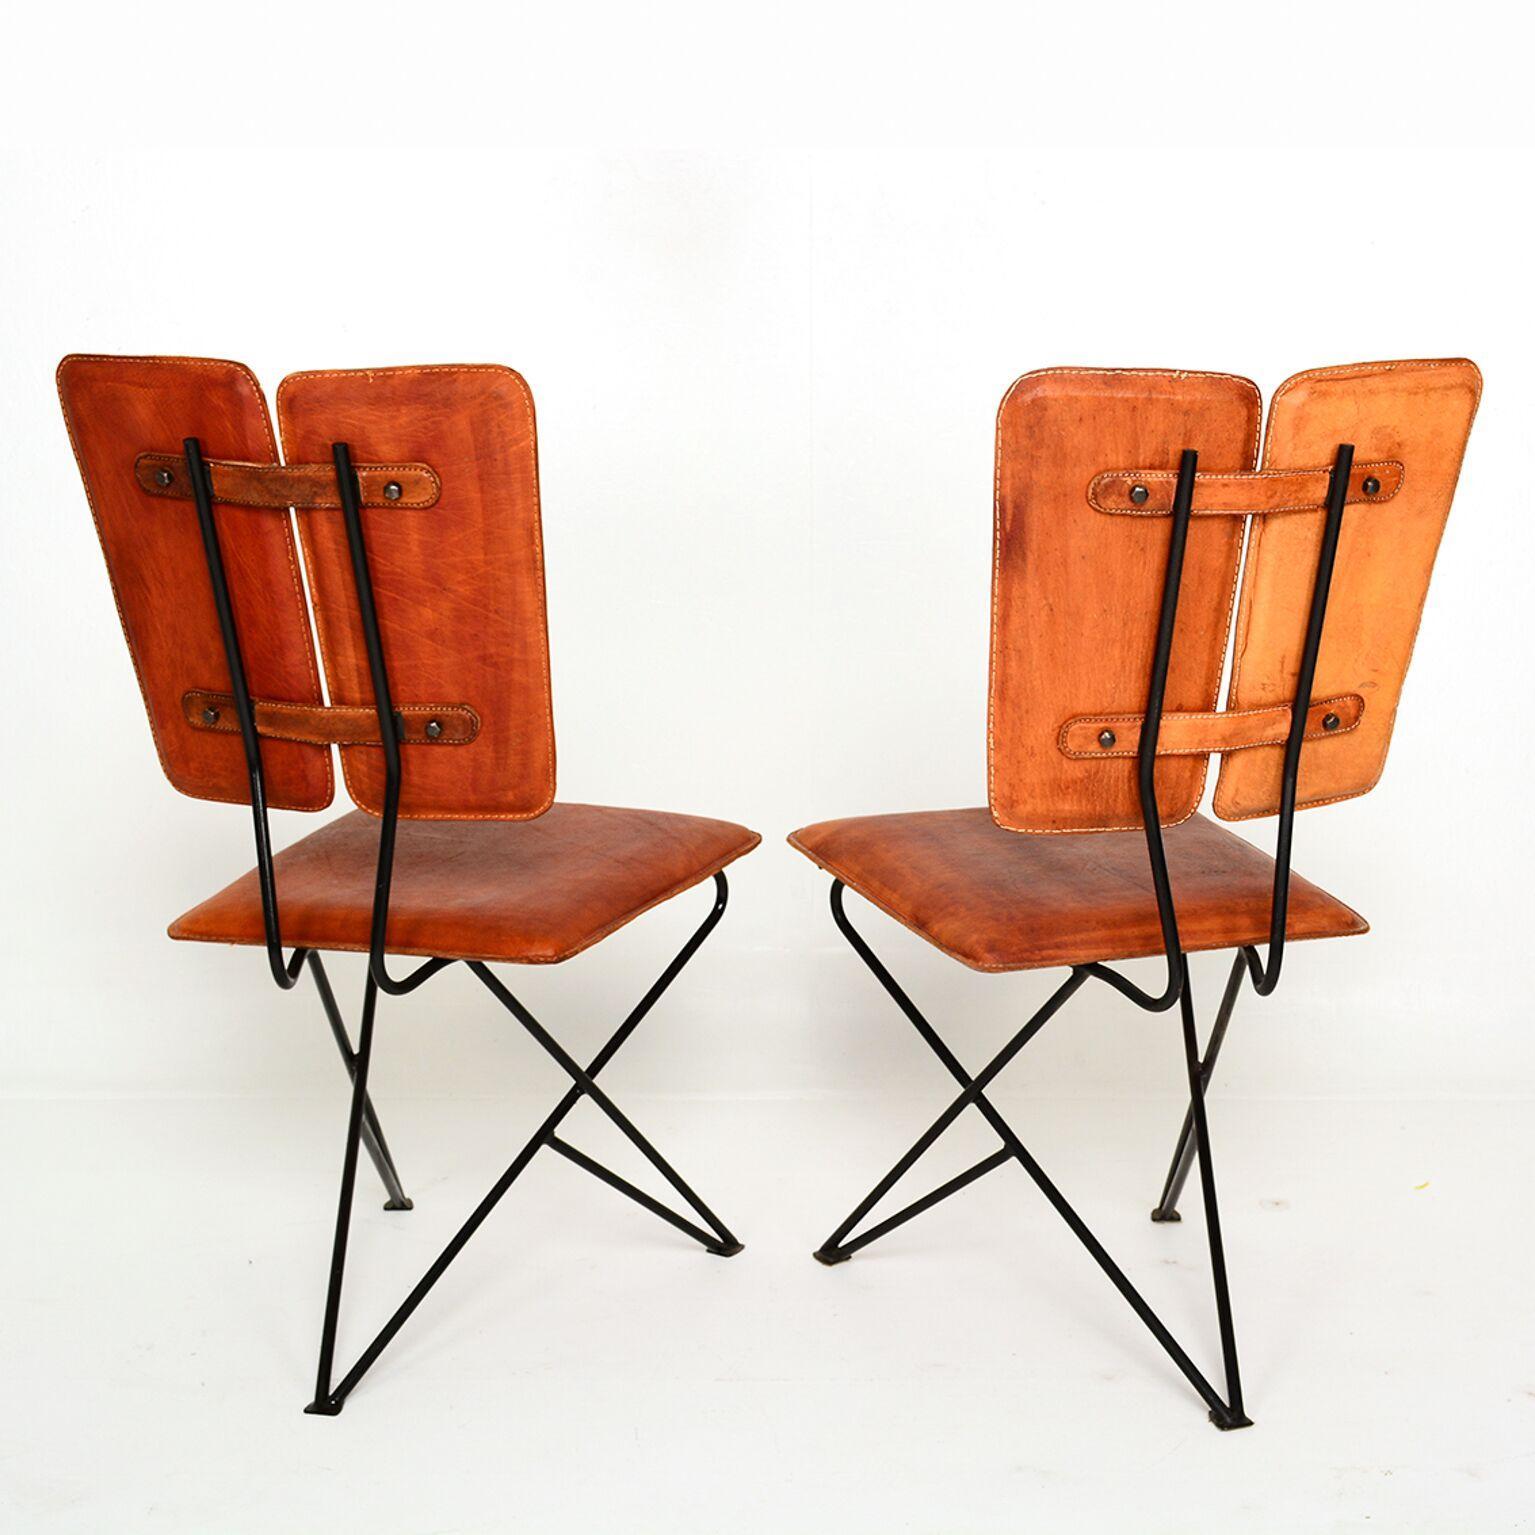 American Mid-Century Modern Design Pablex Tripod Chair in Leather by Ambianic